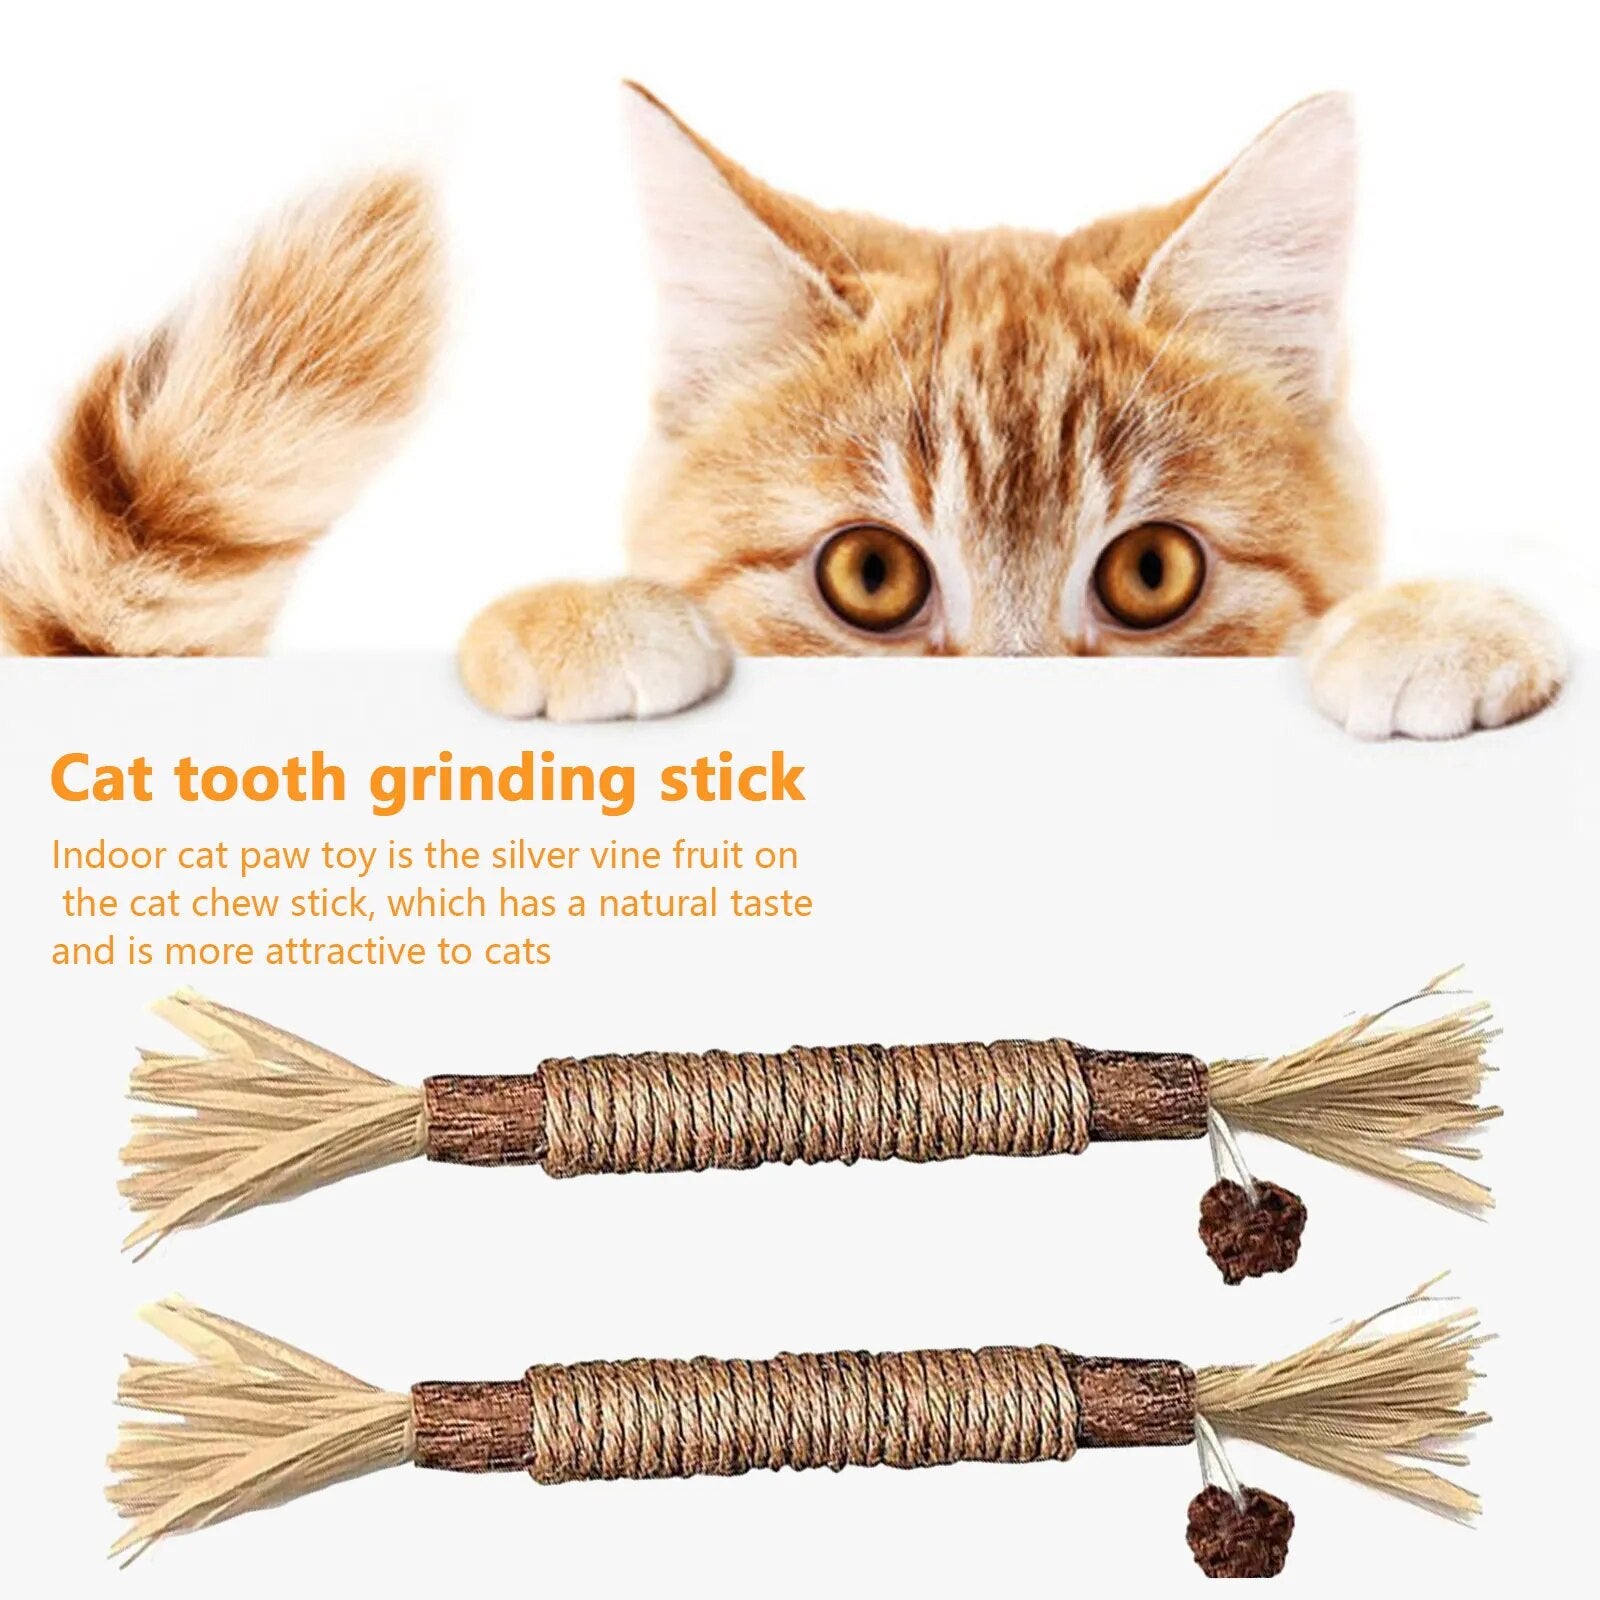 wooden chew stick, the silver vine fruit on the chew stick attracts your cat